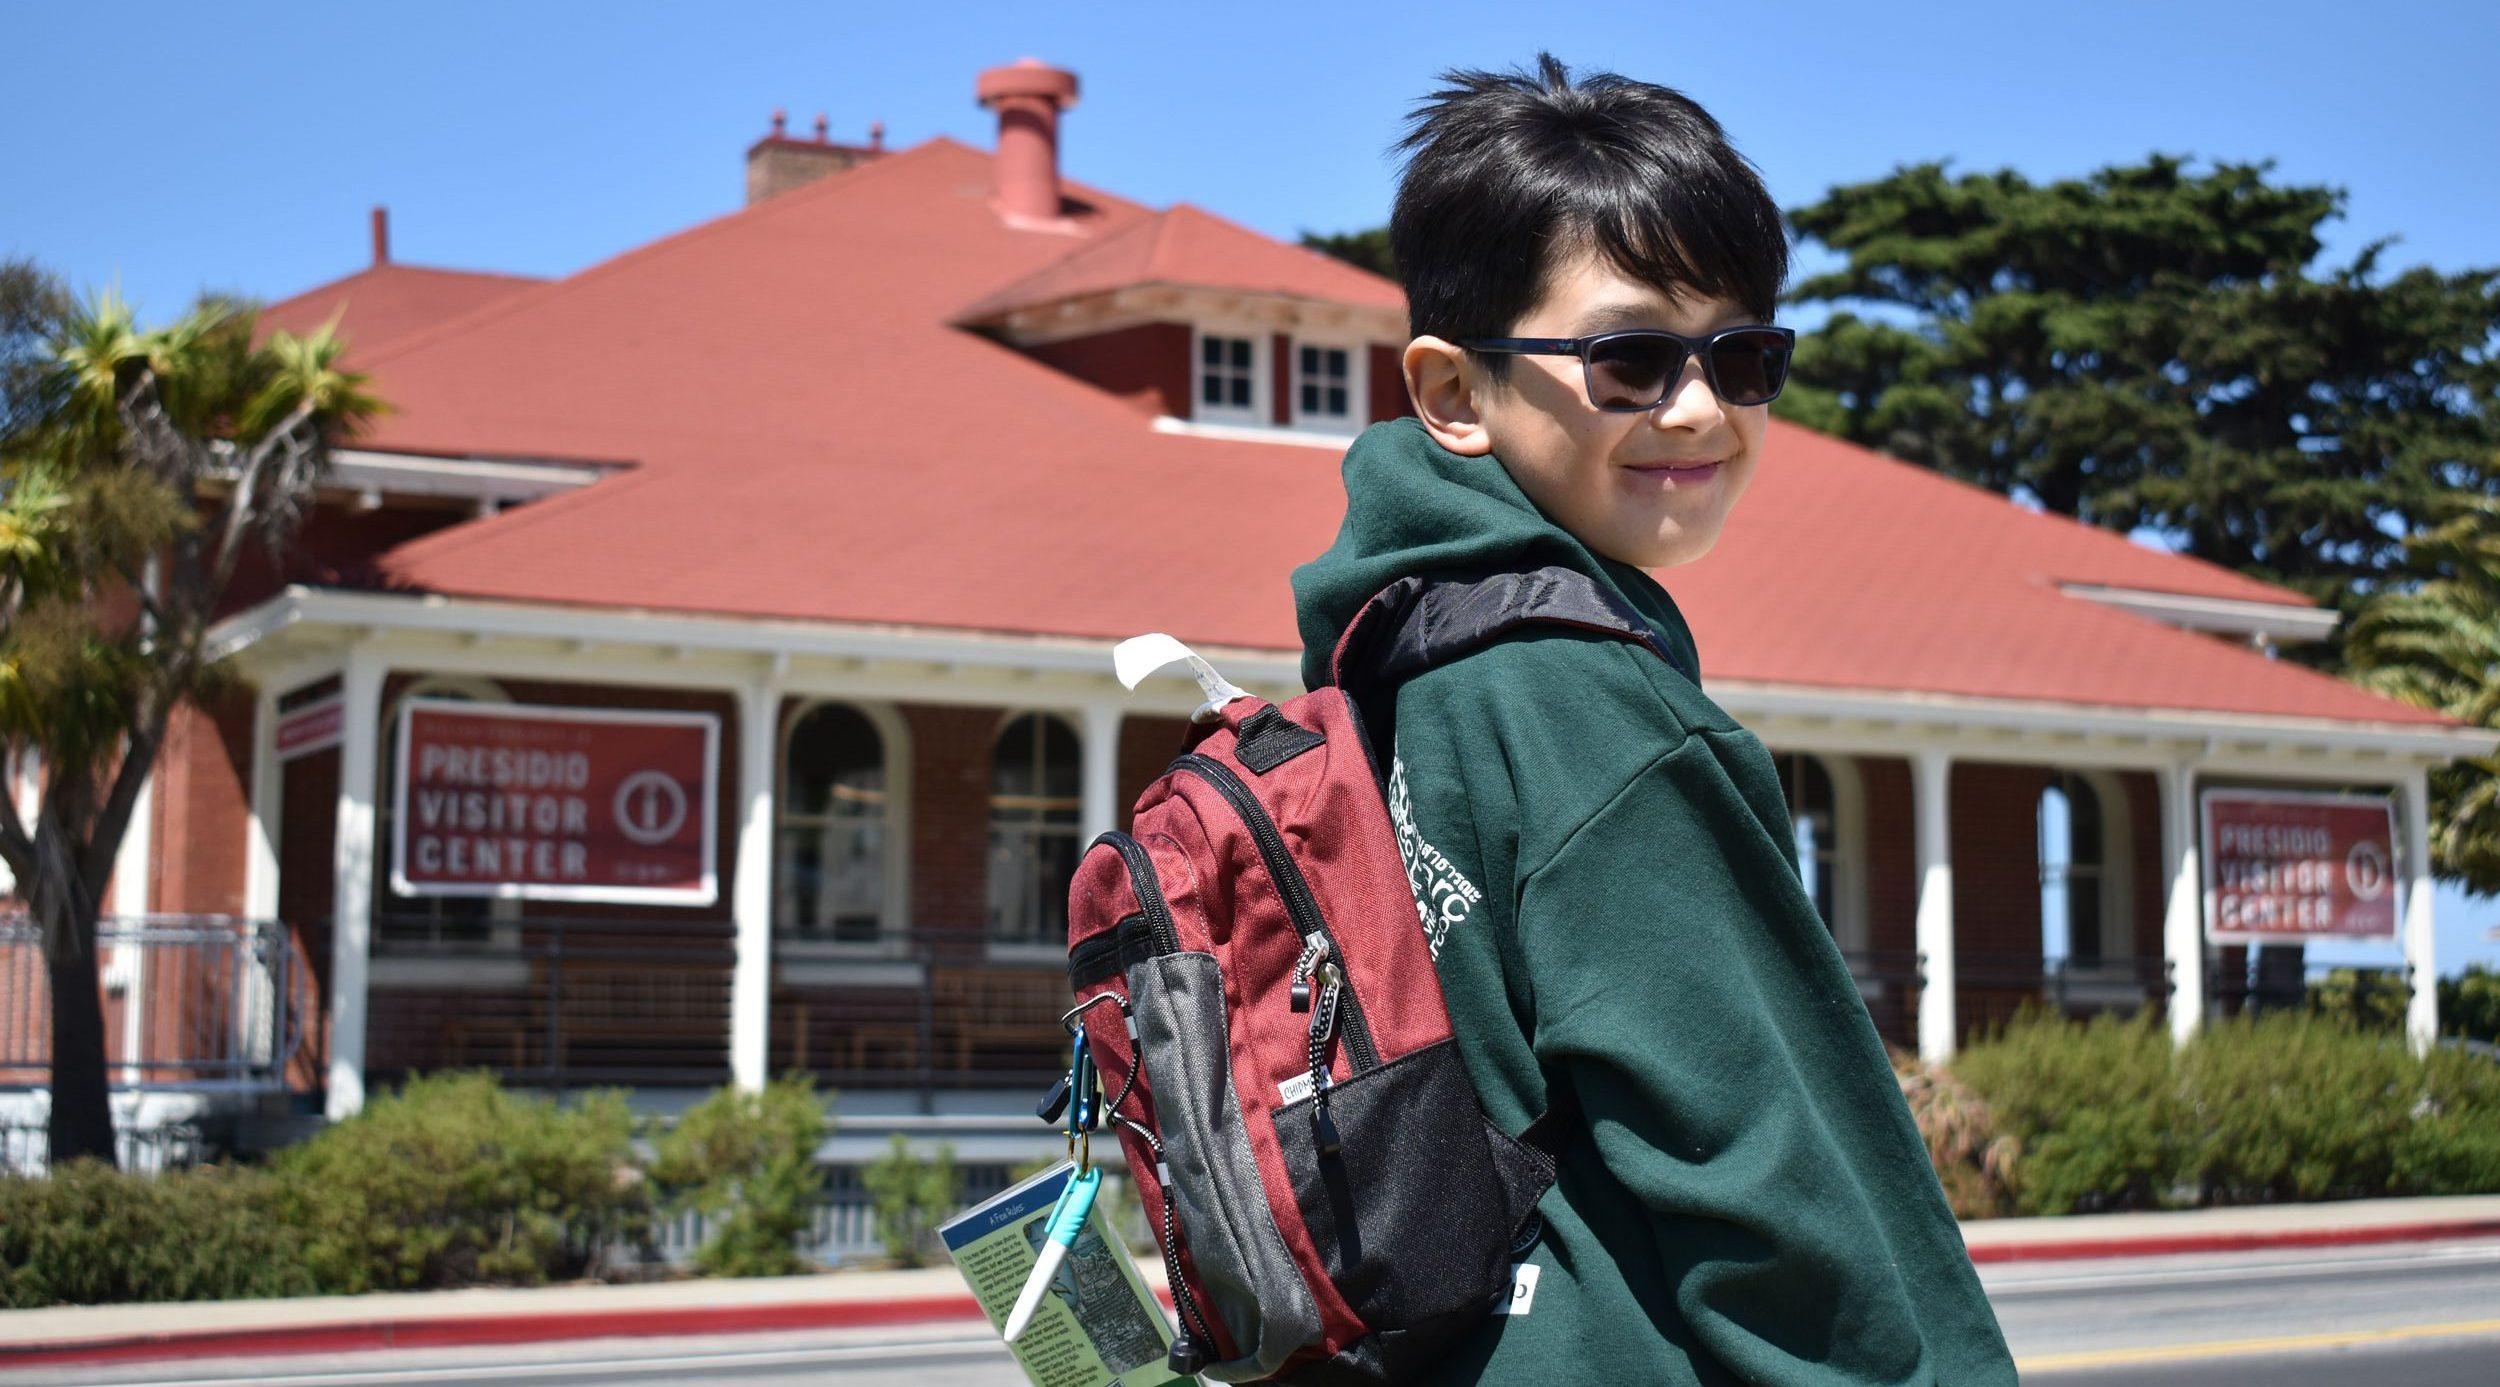 Fisher Tomlinson wearing the red Presidio Explorer Backpack in front of the Presidio Visitor Center